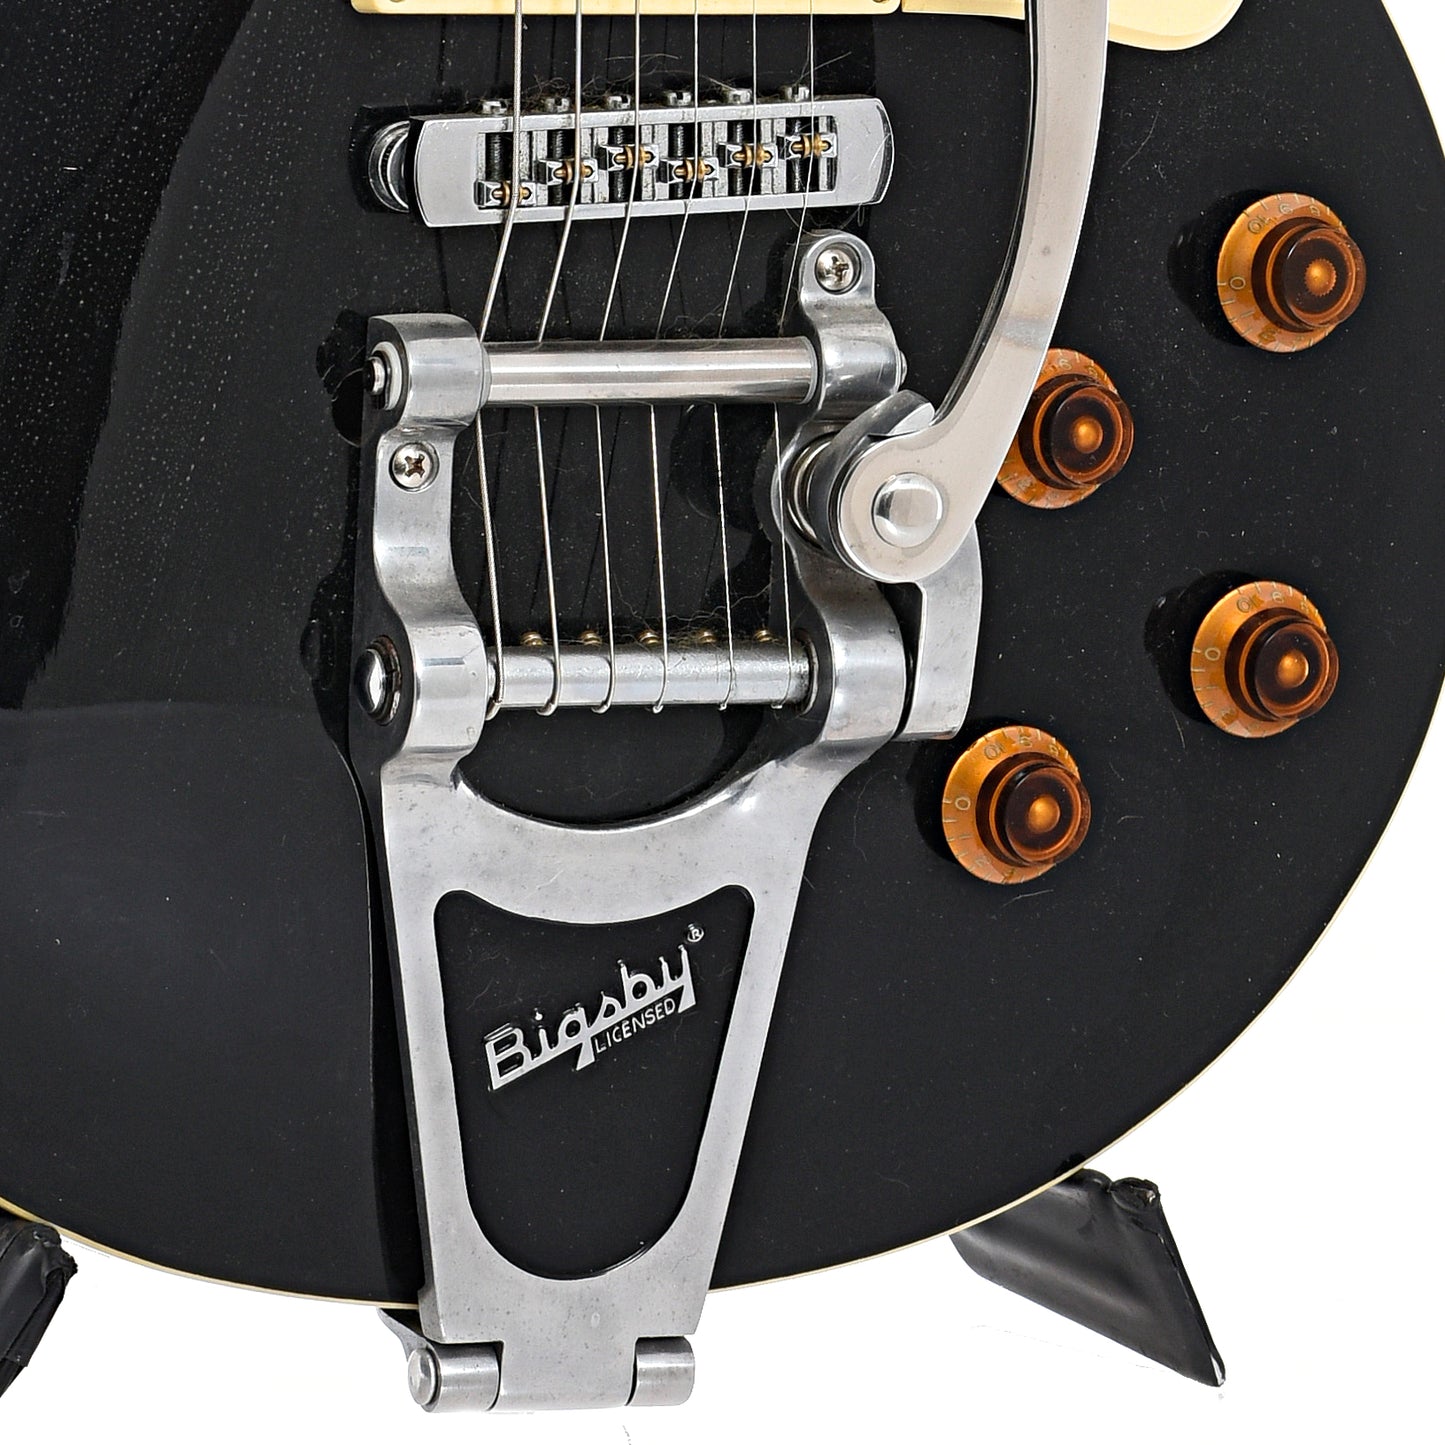 Bigsby tremolo tailpiece, bridge and controls of Les Paul Standard